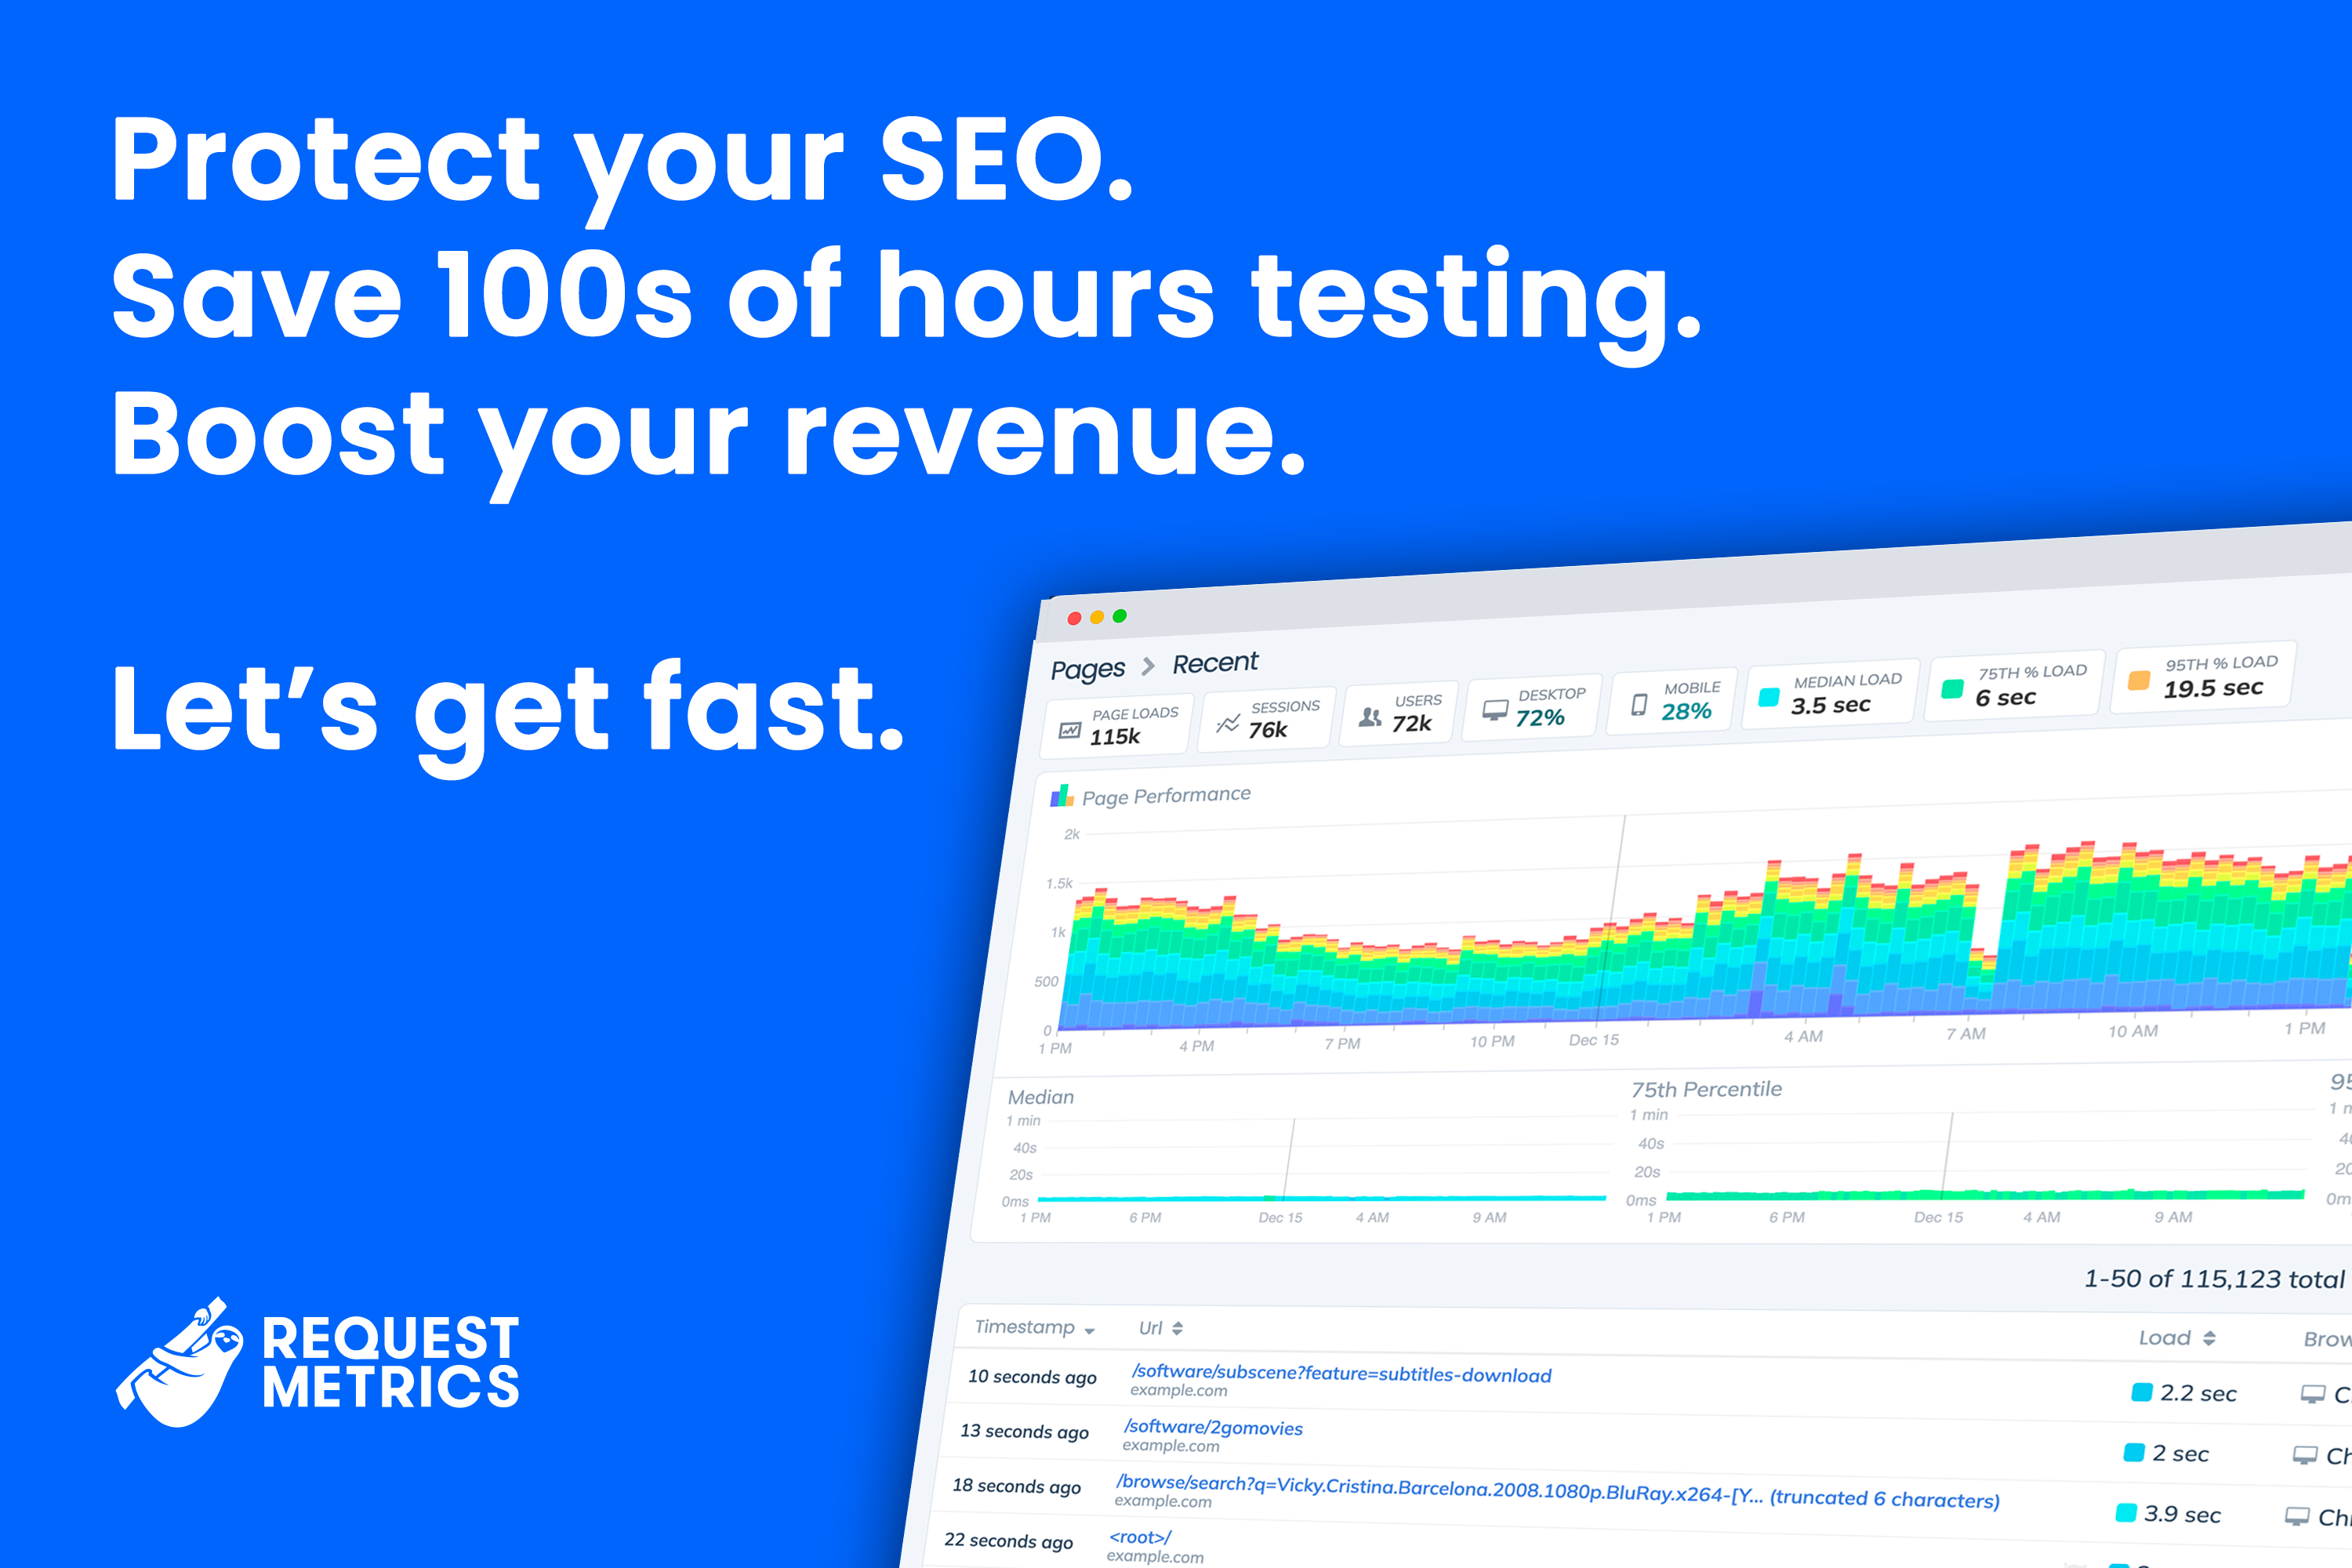 Protect your SEO. Save 100s of hours testing. Boost your revenue. Let's get fast.